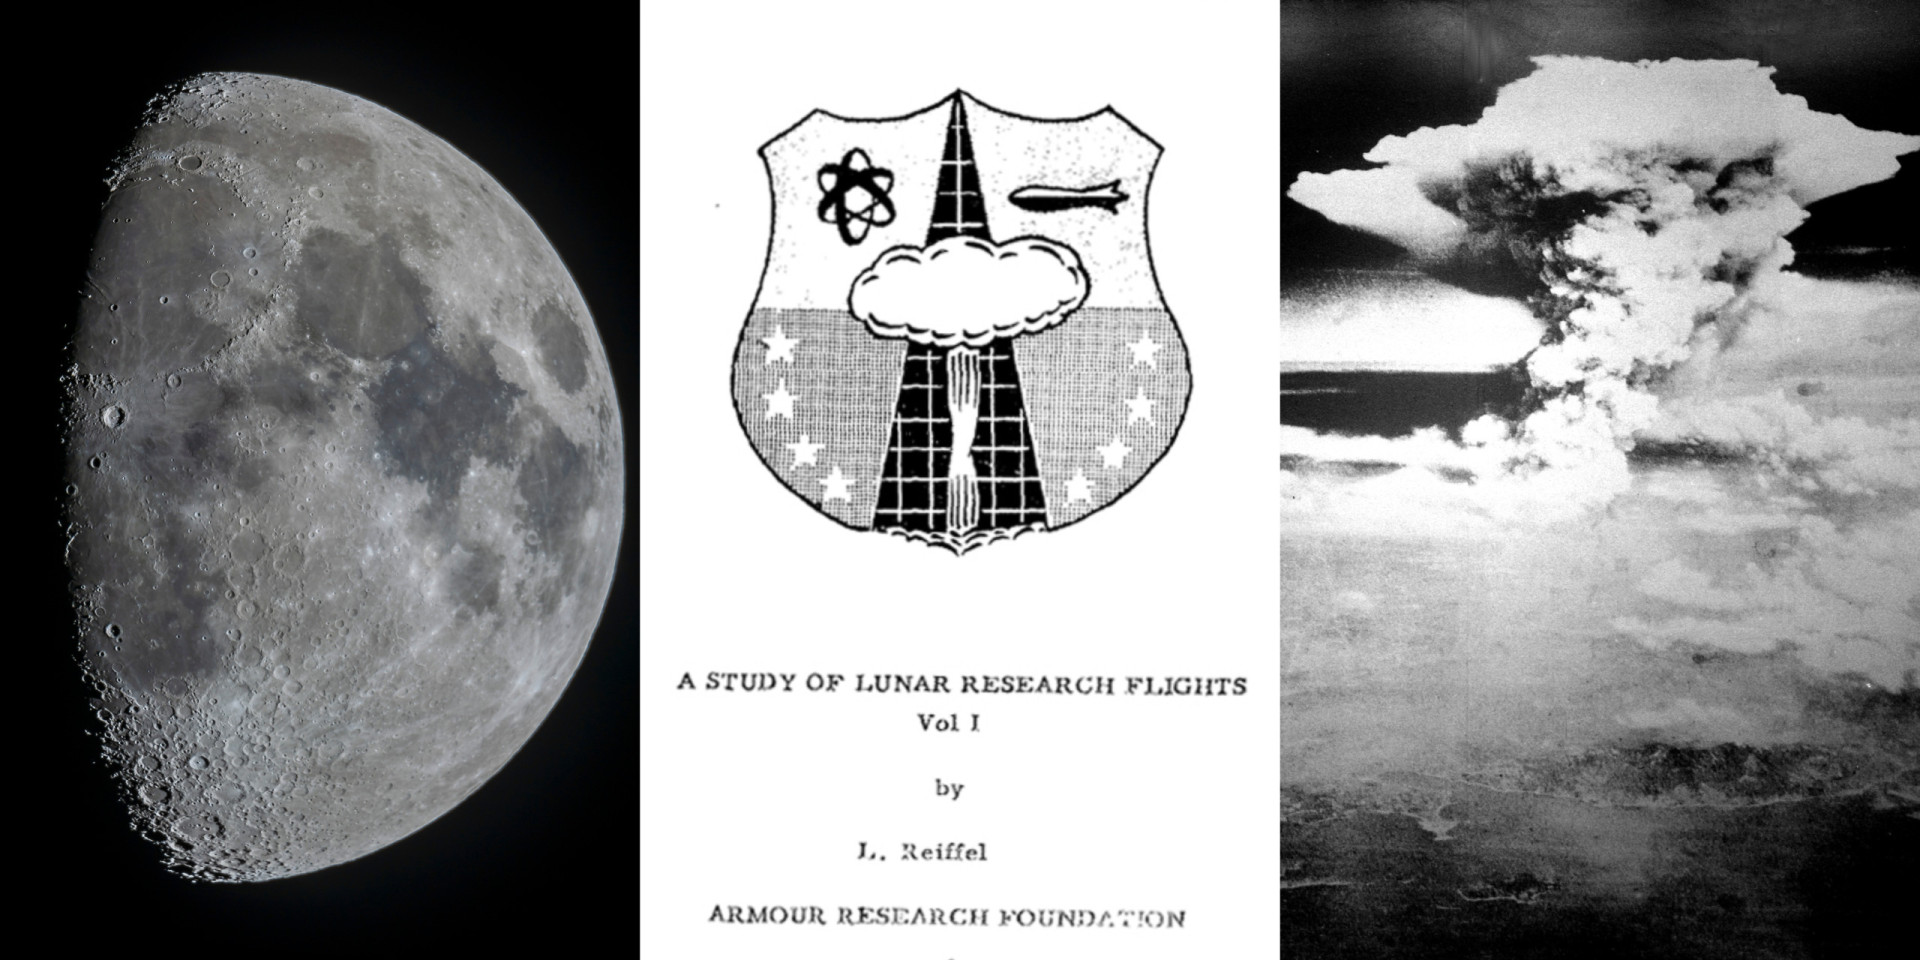 <p>On July 20, 1969, Apollo 11 landed on the surface of the <a href="https://www.starsinsider.com/lifestyle/633182/what-did-going-to-the-moon-achieve-really" rel="noopener">Moon</a>. The Americans have managed to put a human being on the surface of Earth's satellite and history was made. Thankfully, the Moon hadn't suffered any manmade changes back then, but would America's Project A119 have gone ahead a few years prior, things would have been much different.</p> <p>'A Study of Lunar Research Flights,' better known as Project A119, was a top-secret plan developed by the US Air Force in 1958. The goal was to detonate an atomic bomb on the Moon. But why did the US wanted to nuke the Moon, why didn't they go ahead with the plan?</p> <p>Click through the following gallery to find out. </p><p>You may also like:<a href="https://www.starsinsider.com/n/289511?utm_source=msn.com&utm_medium=display&utm_campaign=referral_description&utm_content=713901en-ph"> The most violent zoo attacks of all time</a></p>